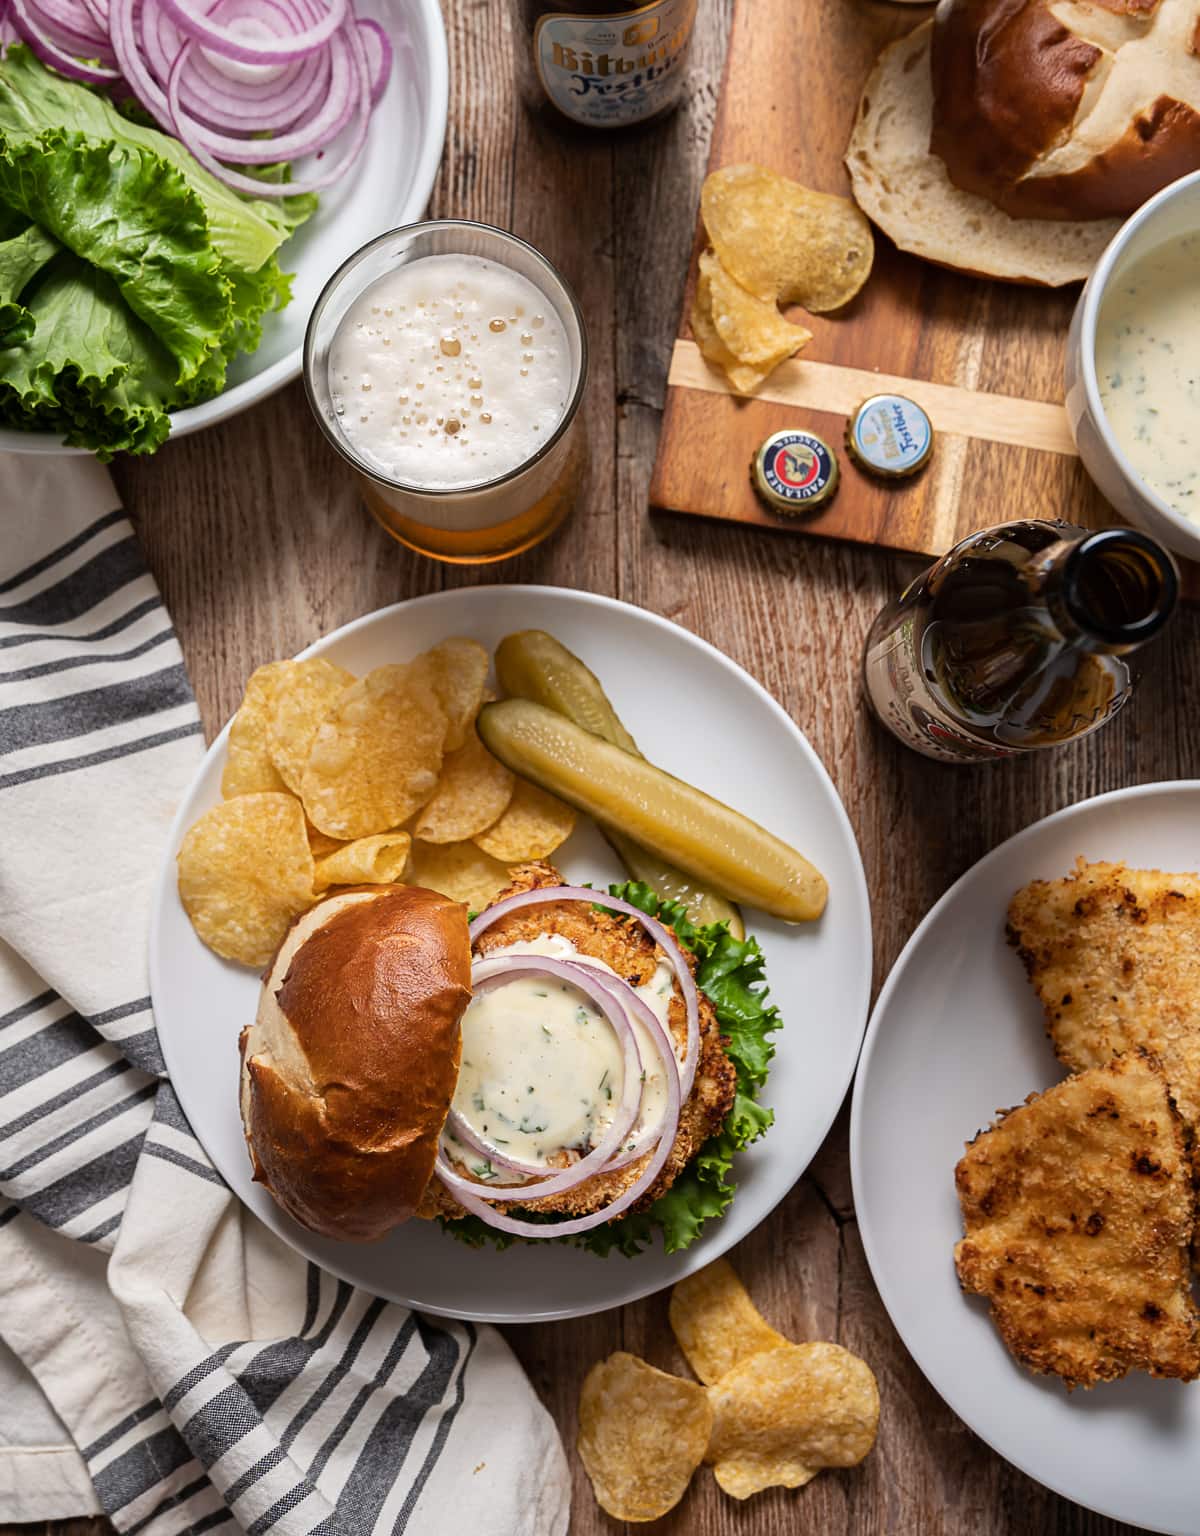 chicken schnitzel sandwich with mayonnaise sauce, red onion rings, plate with thin fried chicken, bottle and glass of beer, bowl with lettuce and onions, cutting board with pretzel buns and bowl of mayonnaise sauce.